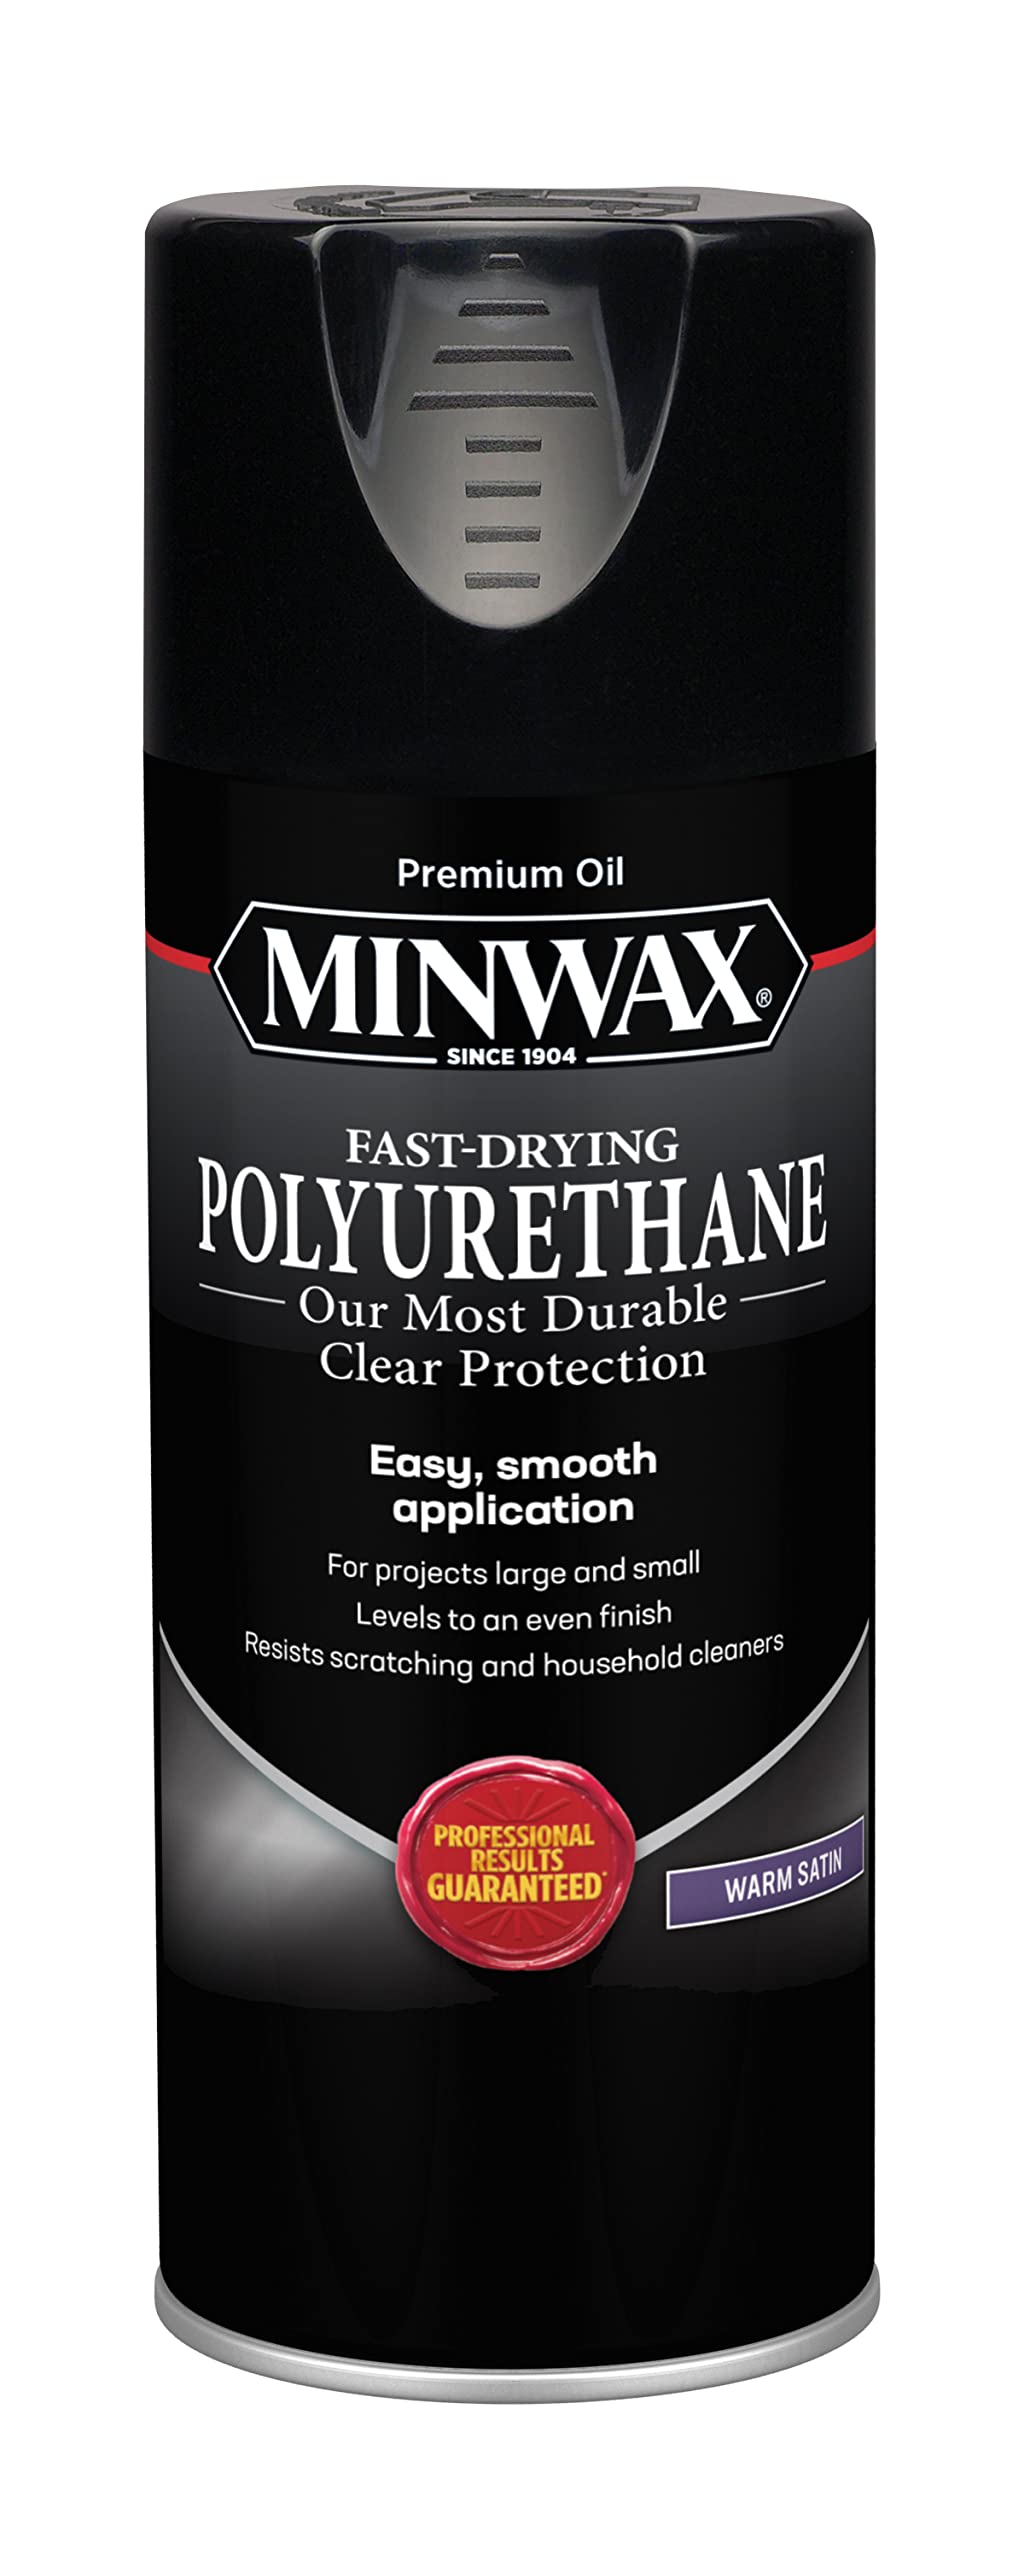 Minwax Fast Drying Polyurethane Spray, Protective Wood Finish, Clear Satin,  11.5 oz. Aerosol Can (Pack of 2) 